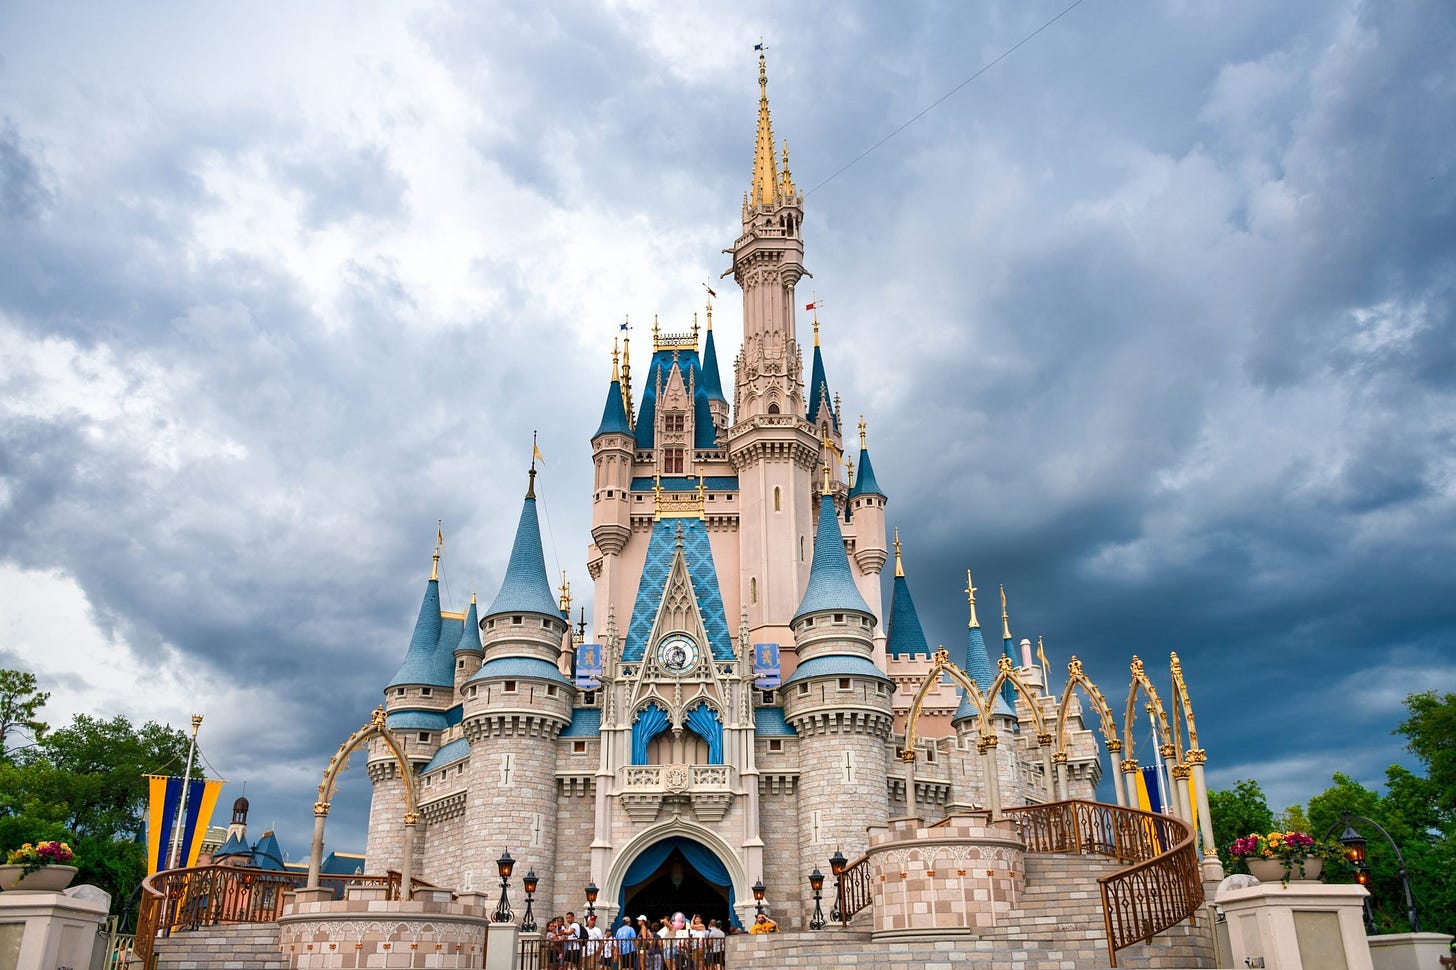 Cinderella Castle: 50 Things You Never Knew about the Disney Castle